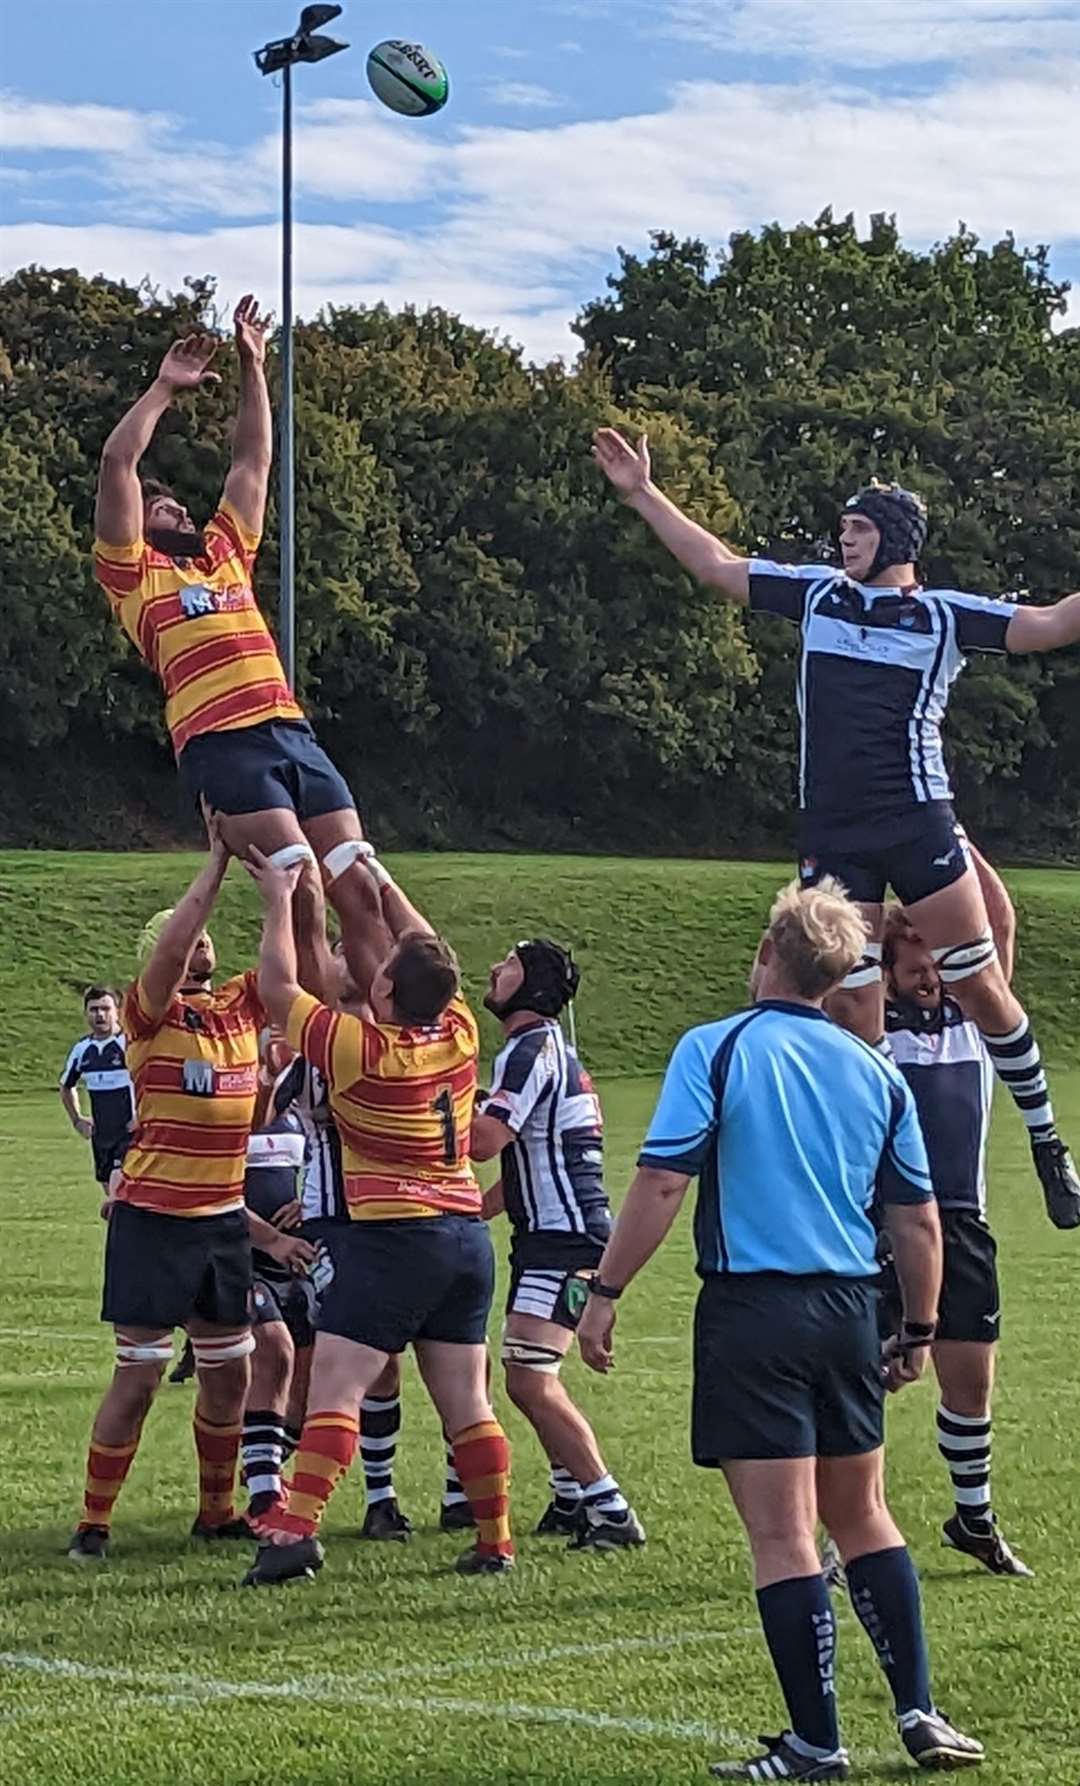 Medway leap into action at a lineout